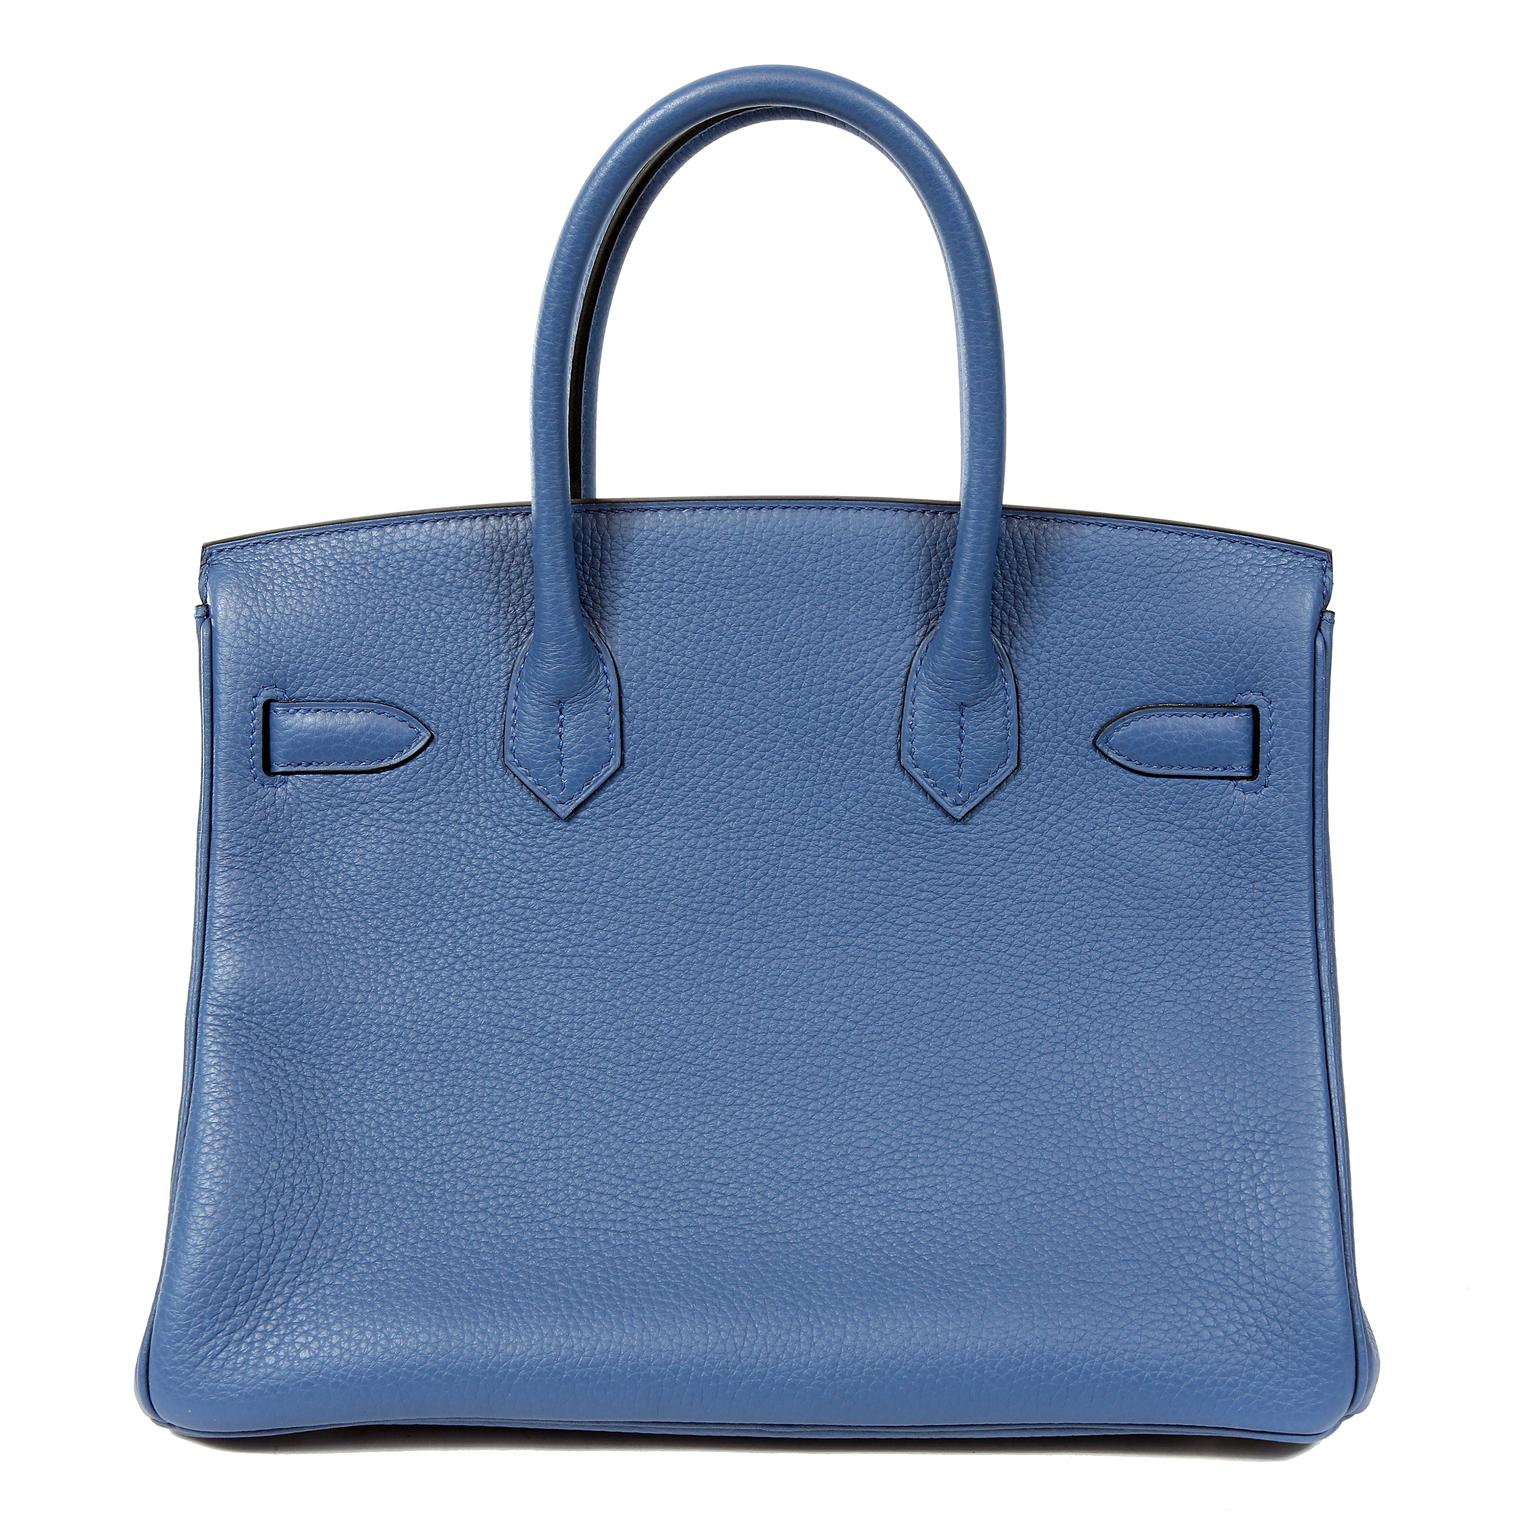 This authentic Hermès Bleu Saint Cyr Clemence 30 cm Birkin is in pristine condition; never before carried.  Hermès bags are considered the ultimate luxury item the world over.  Hand stitched by skilled craftsmen, wait lists of a year or more are